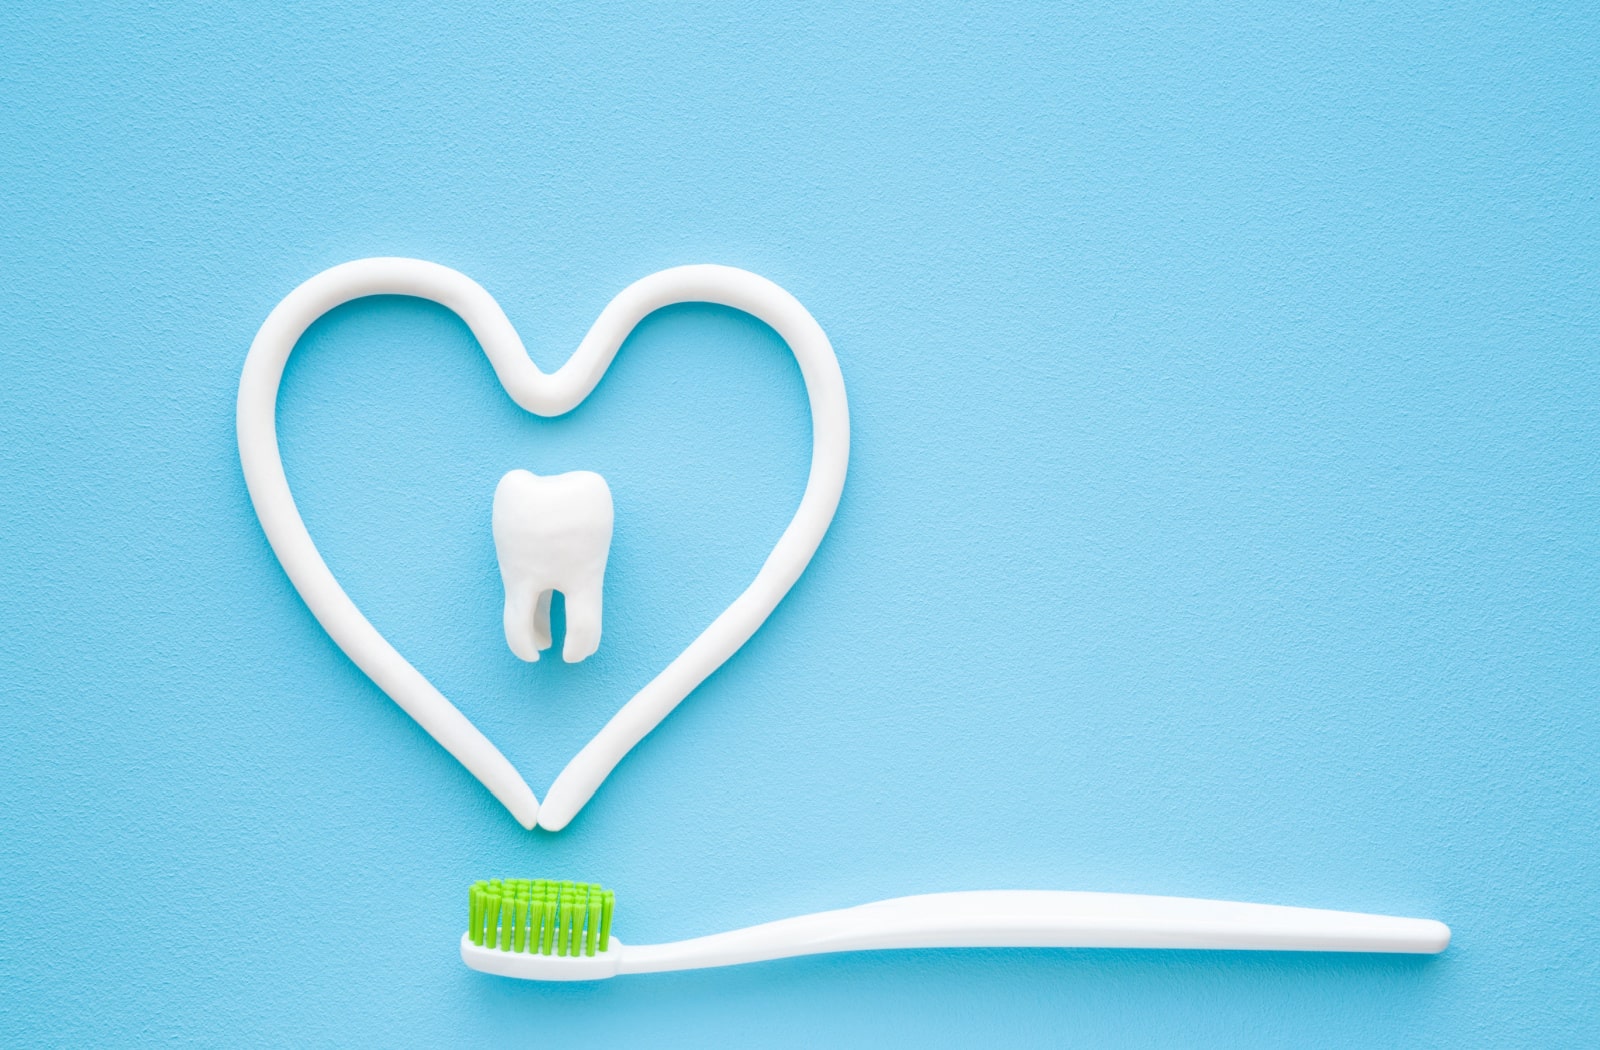 A toothbrush with green bristles beneath some toothpaste that is laid out in the shape of a heart. There is also a plastic model of a tooth in the middle of the heart shape.